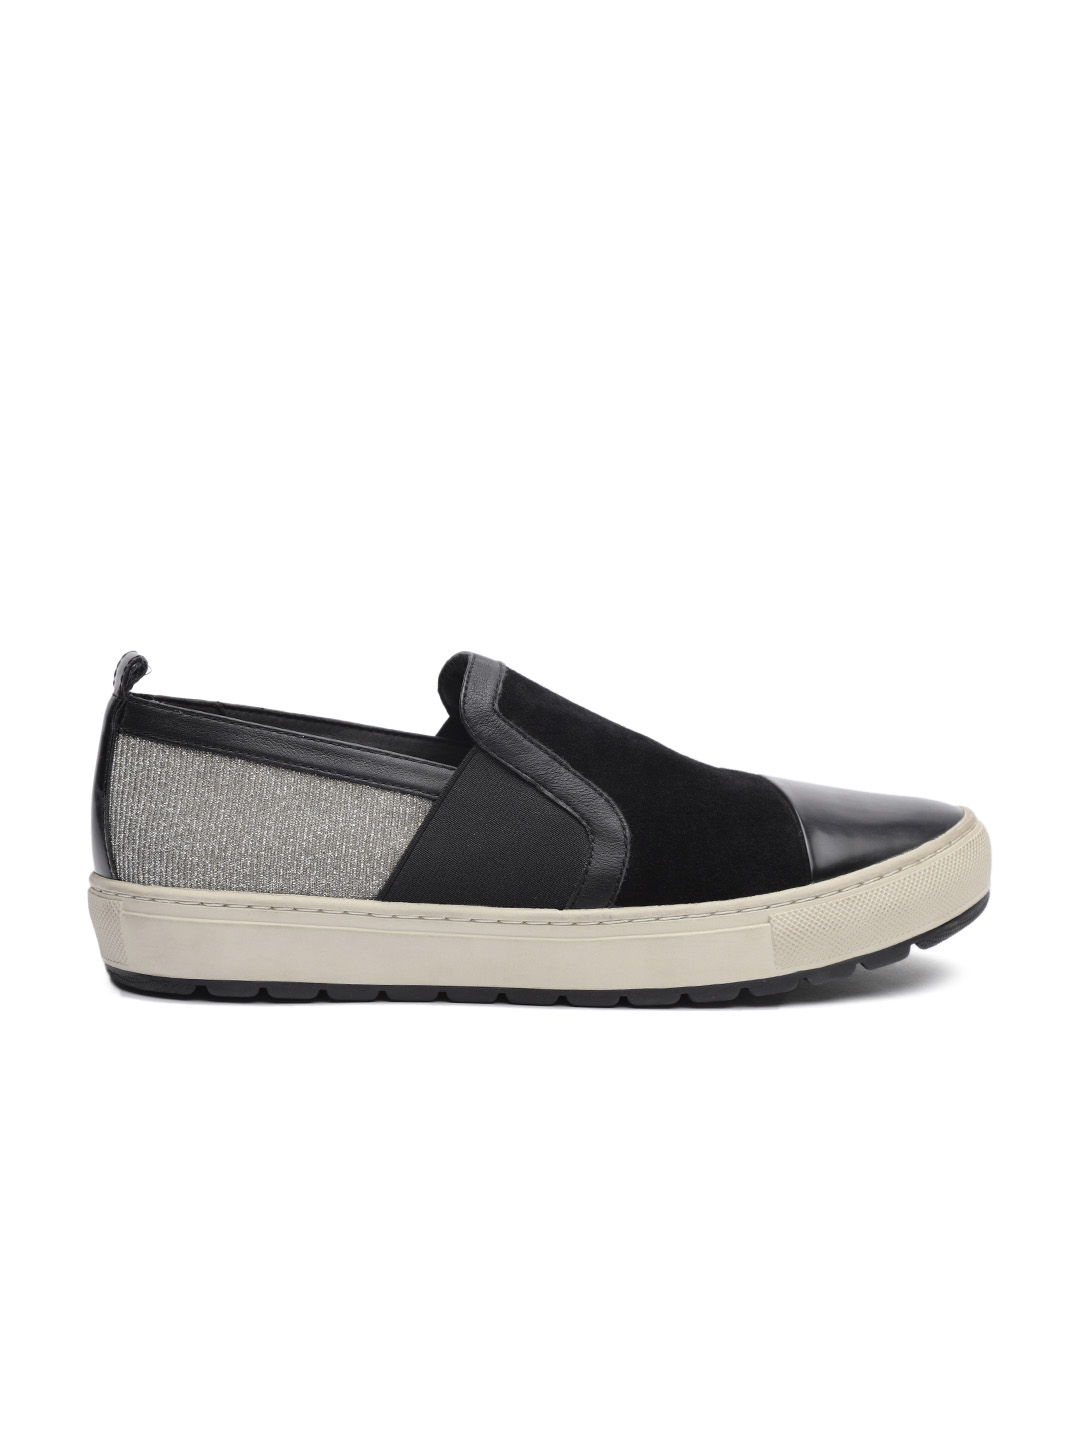 Geox Women Black & Silver Leather Slip-On Sneakers Price in India